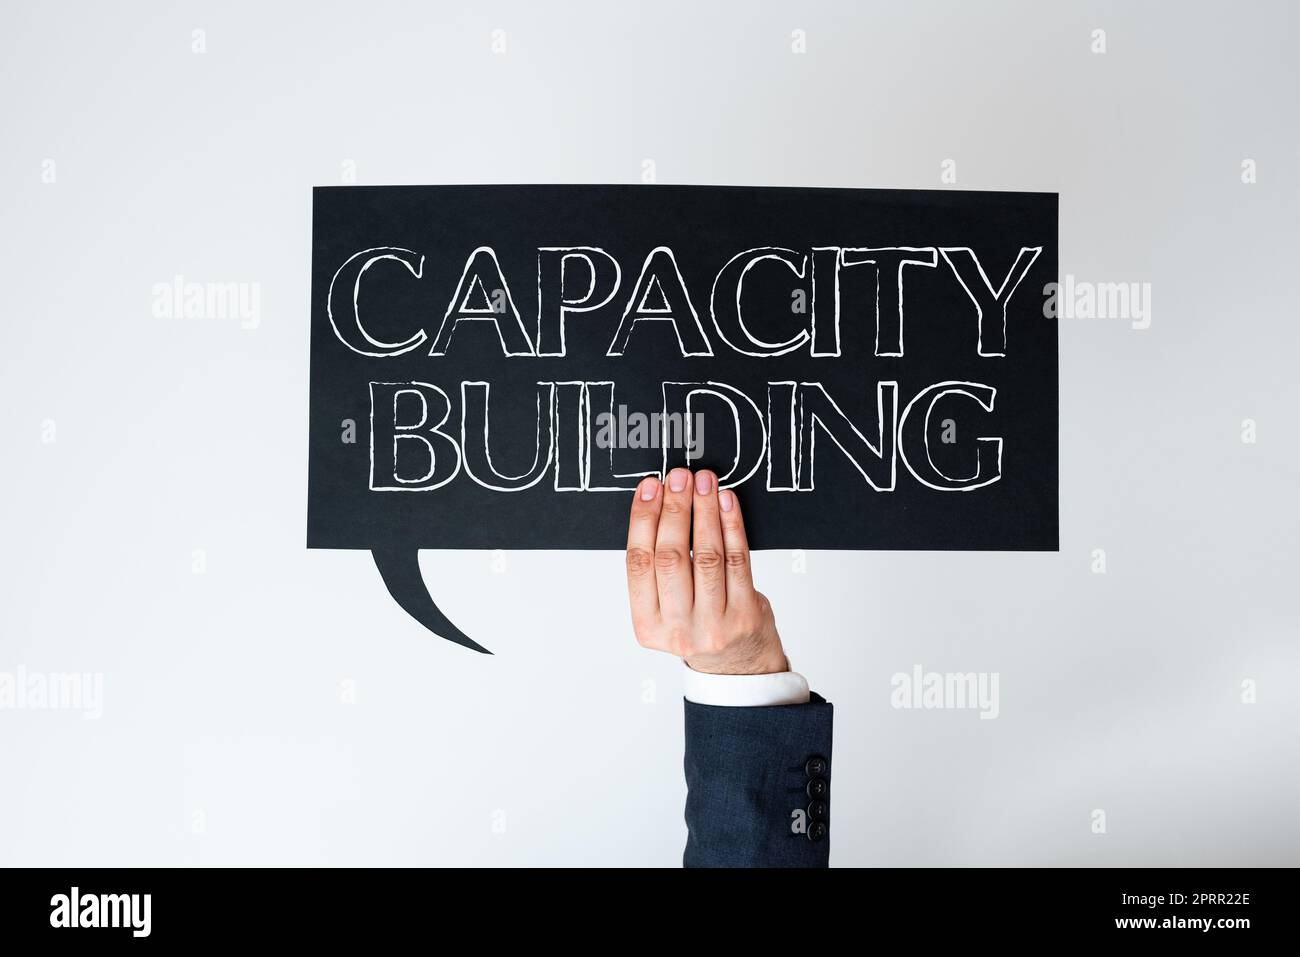 Text caption presenting Capacity BuildingStrengthen the abilities of individuals Workforce planning. Business idea Strengthen the abilities of individuals Workforce planning Stock Photo